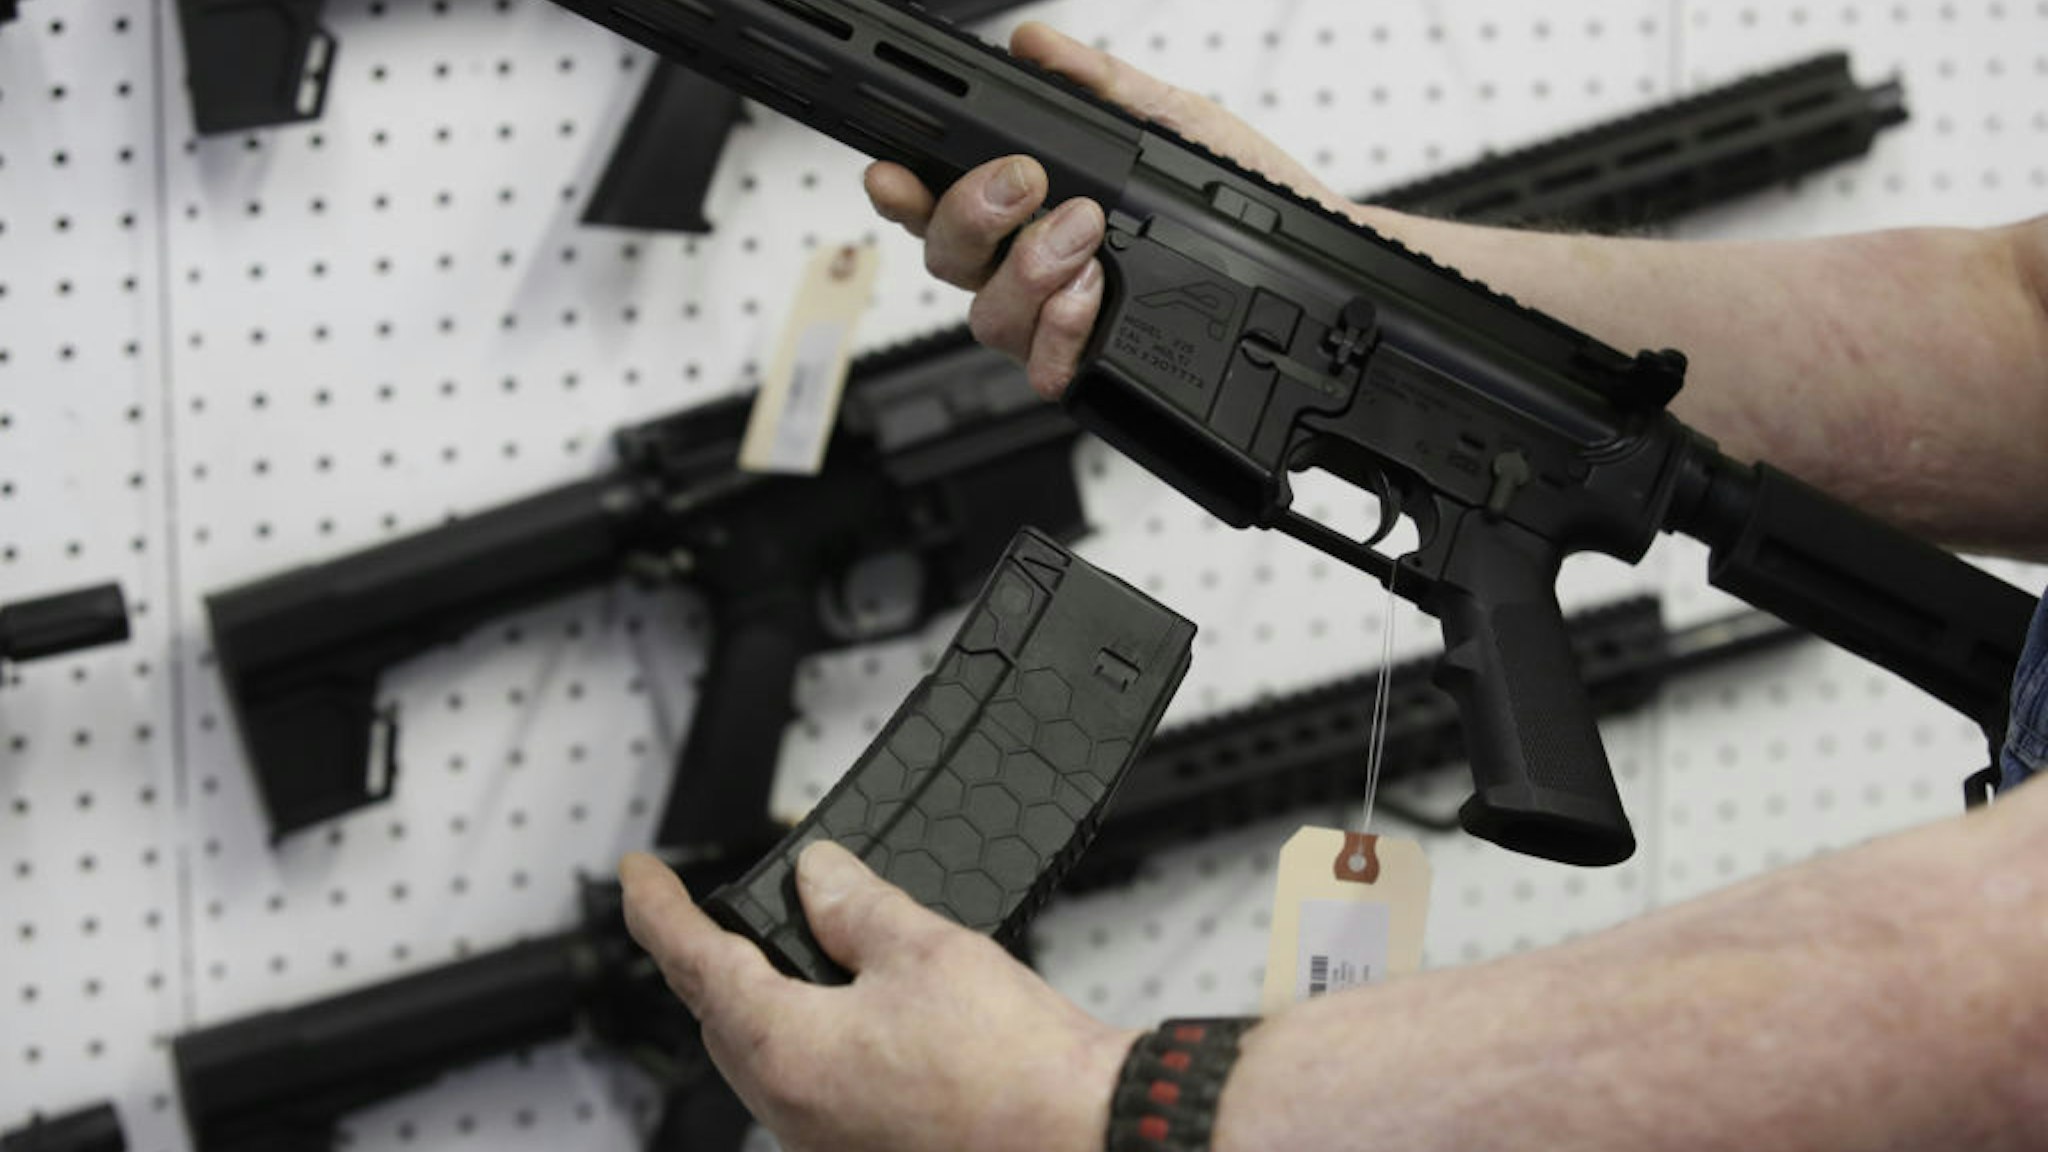 A salesperson holds a high capacity magazine for an AR-15 rifle at a store in Orem, Utah, U.S., on Thursday, March 25, 2021. Two mass shootings in one week are giving Democrats new urgency to pass gun control legislation, but opposition from Republicans in the Senate remains the biggest obstacle to any breakthrough in the long-stalled debate. Photographer: George Frey/Bloomberg